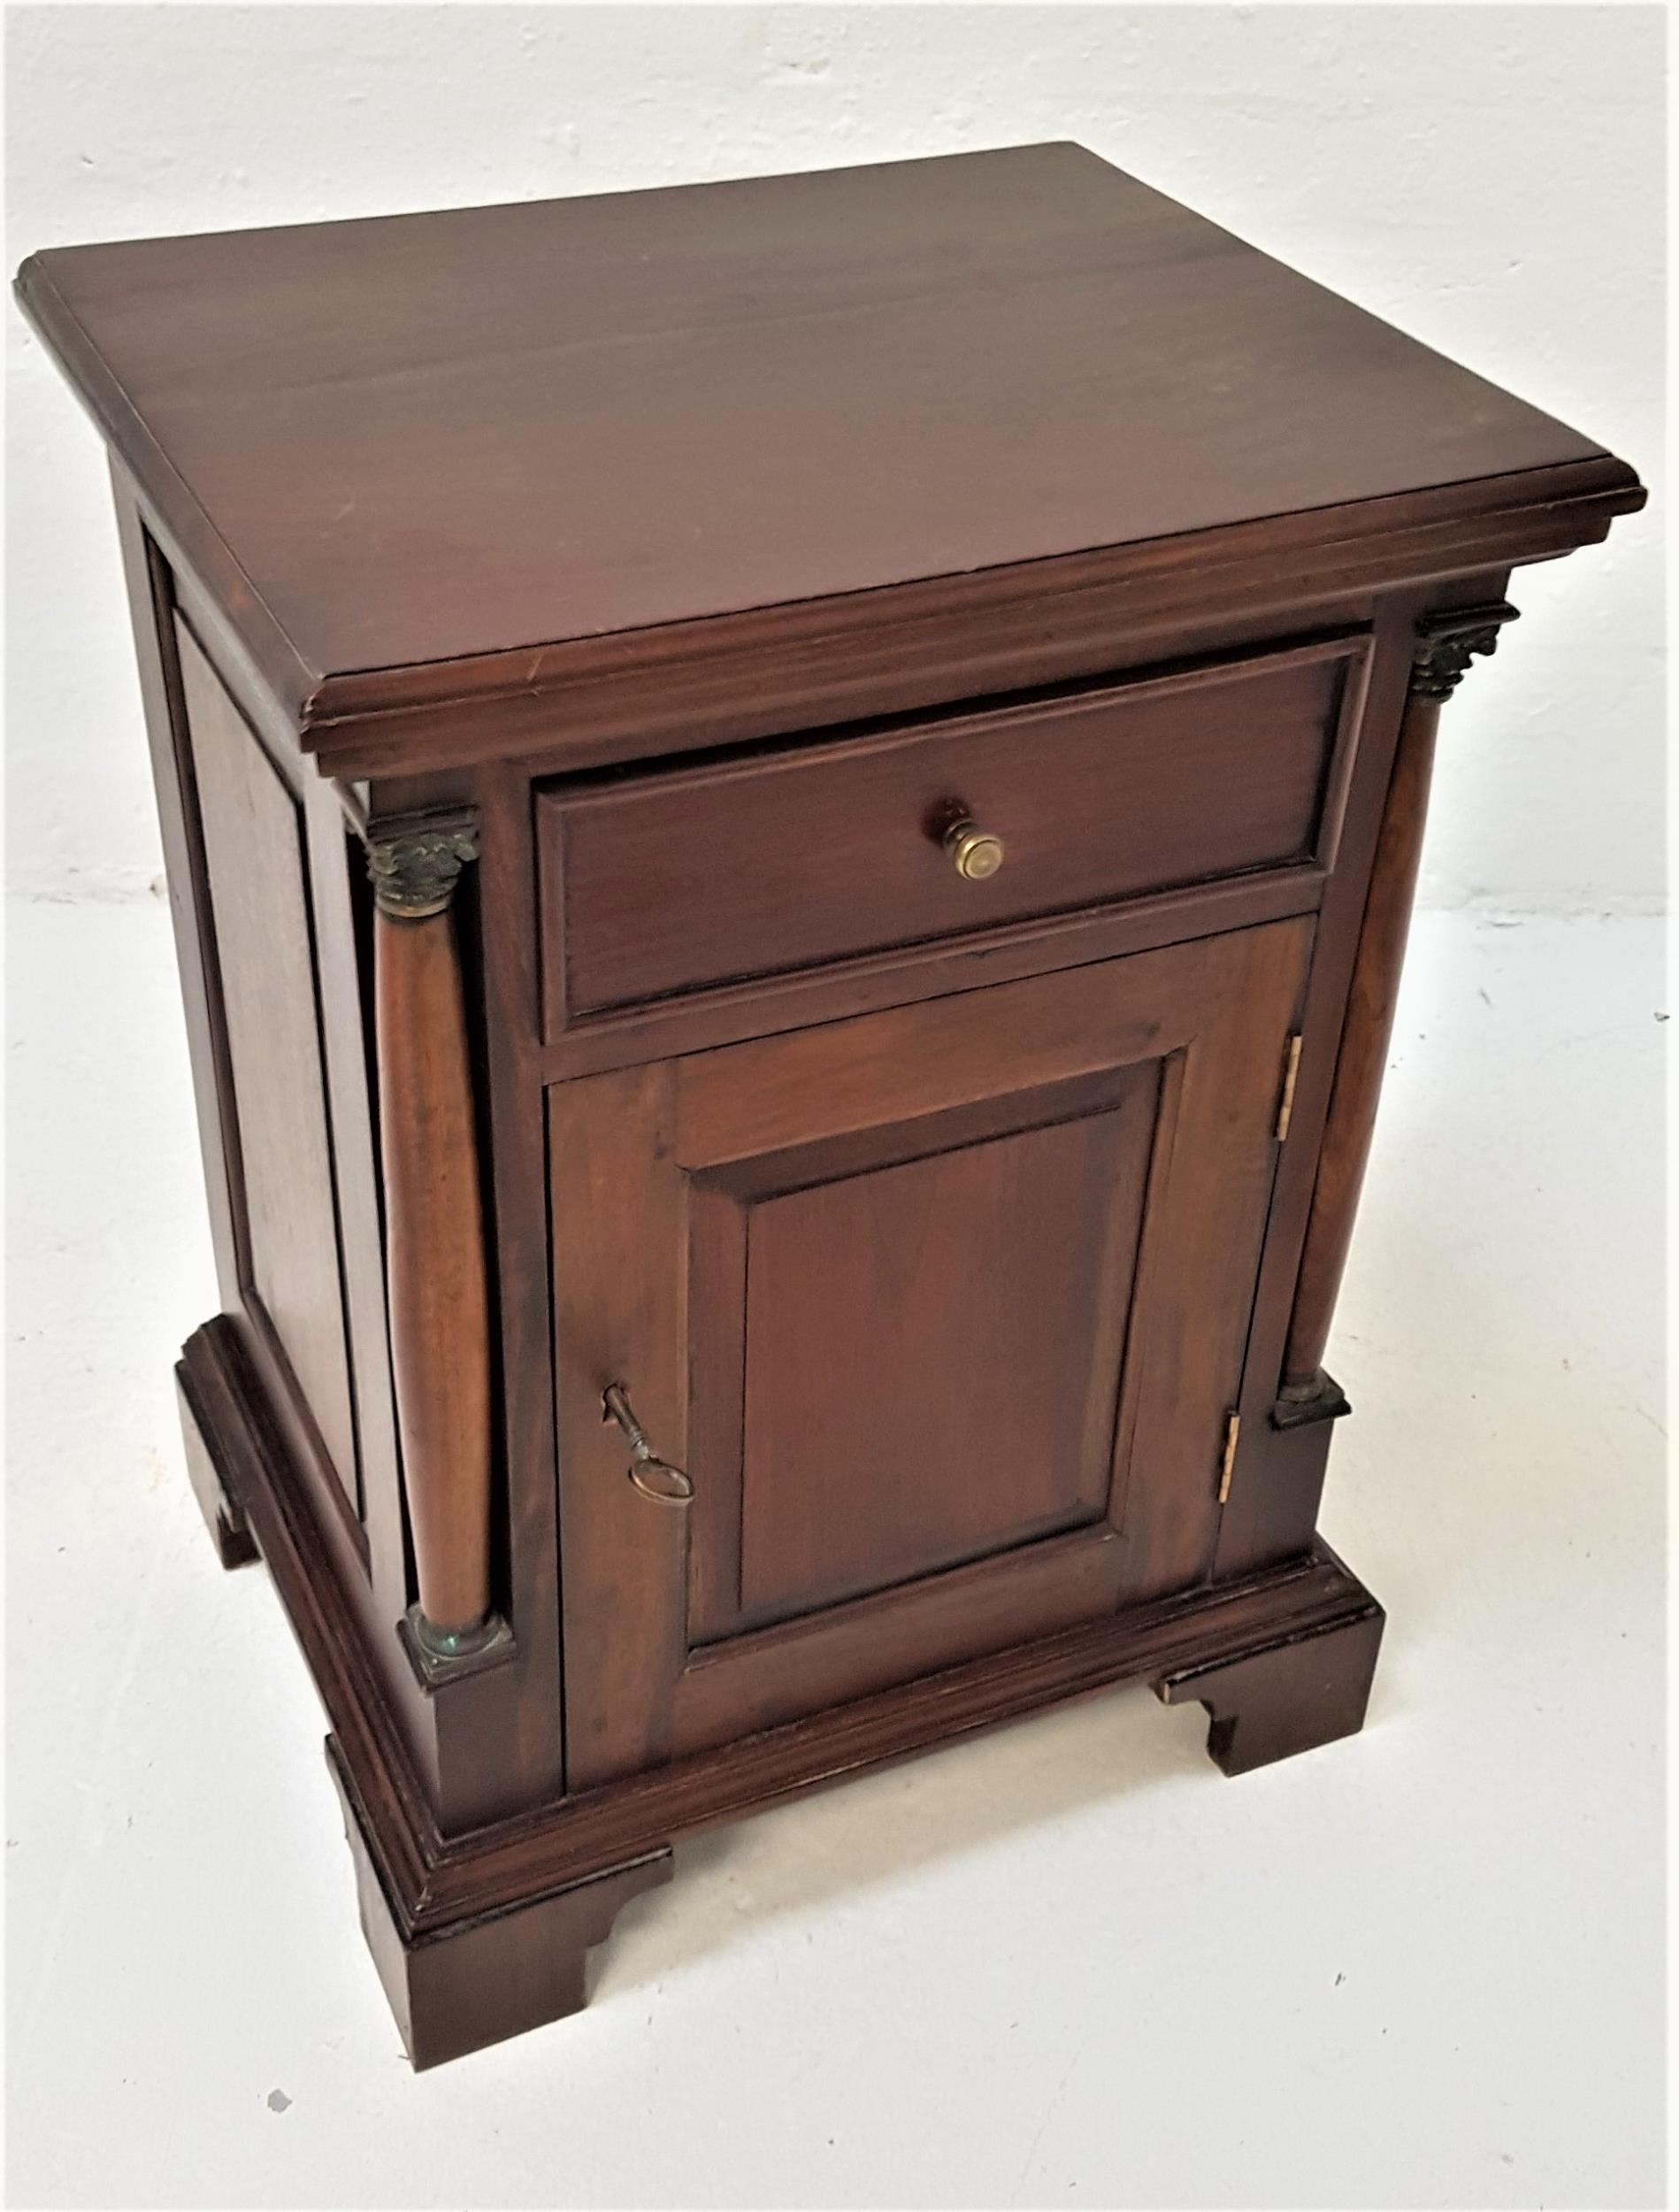 TEAK SIDE CABINET with a moulded top above a paneled frieze drawer with a paneled cupboard door